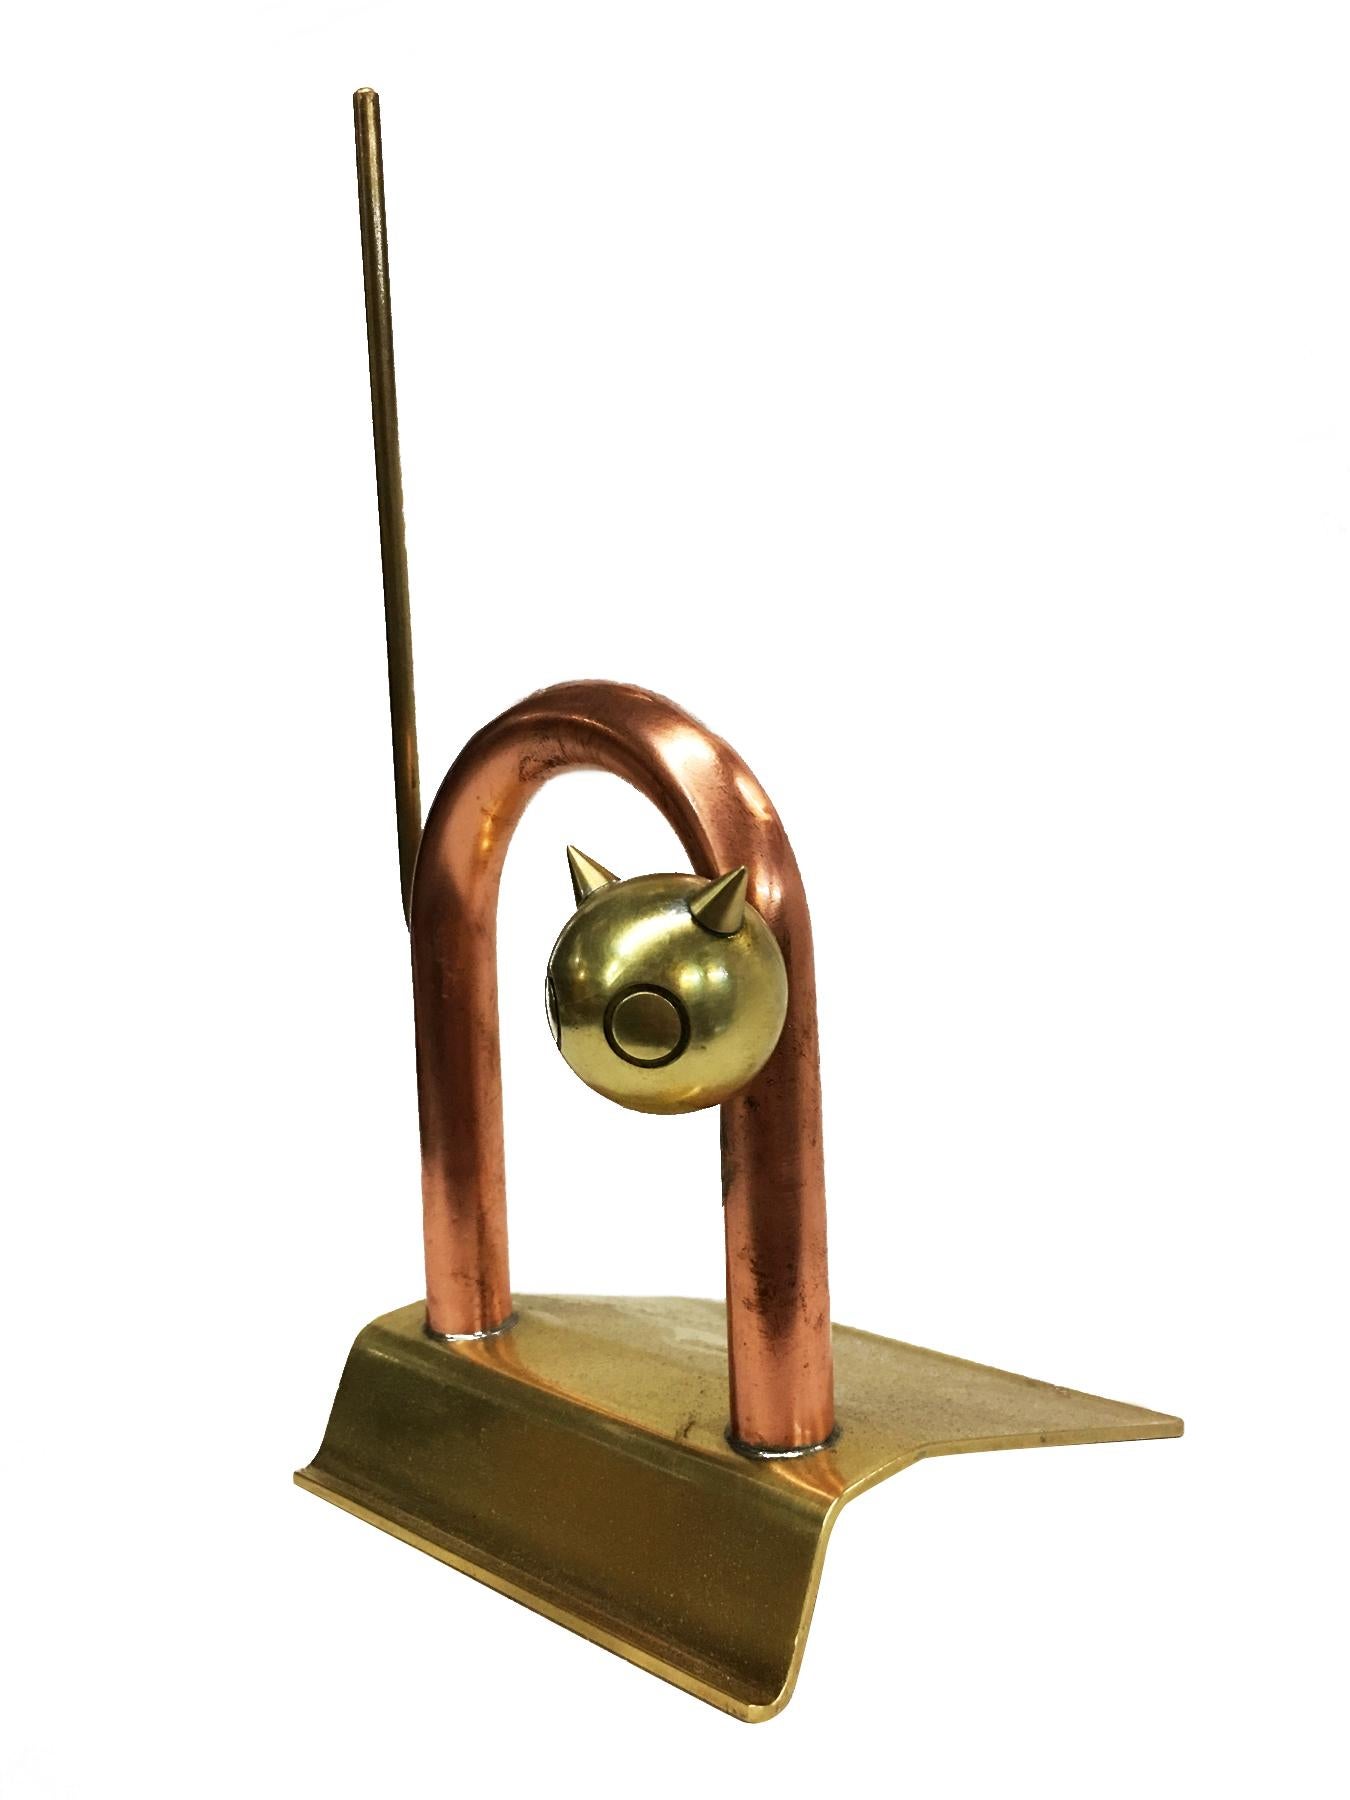 Art Deco Era brass and copper cat statue designed by Walter Von Nessen for the Chase Brass Company. It has been used as a doorstop or a bookend, too.